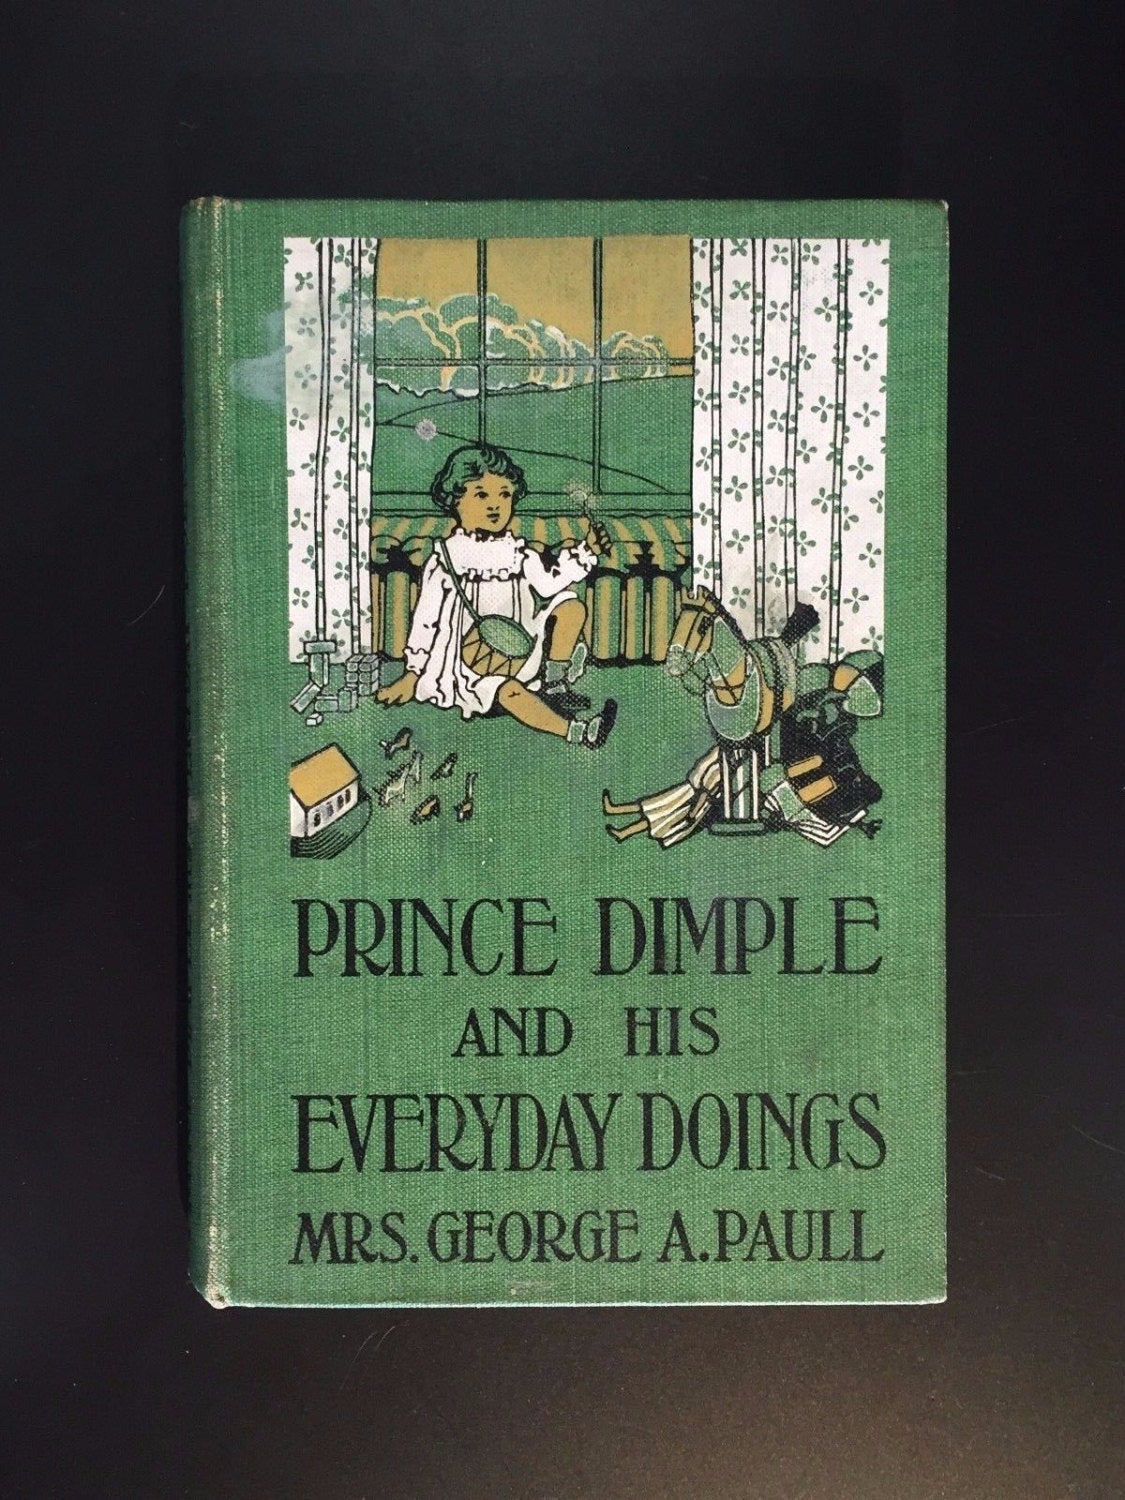 Prince Dimple And His Everyday Doings, George A. Paull, 1890, Illustrated